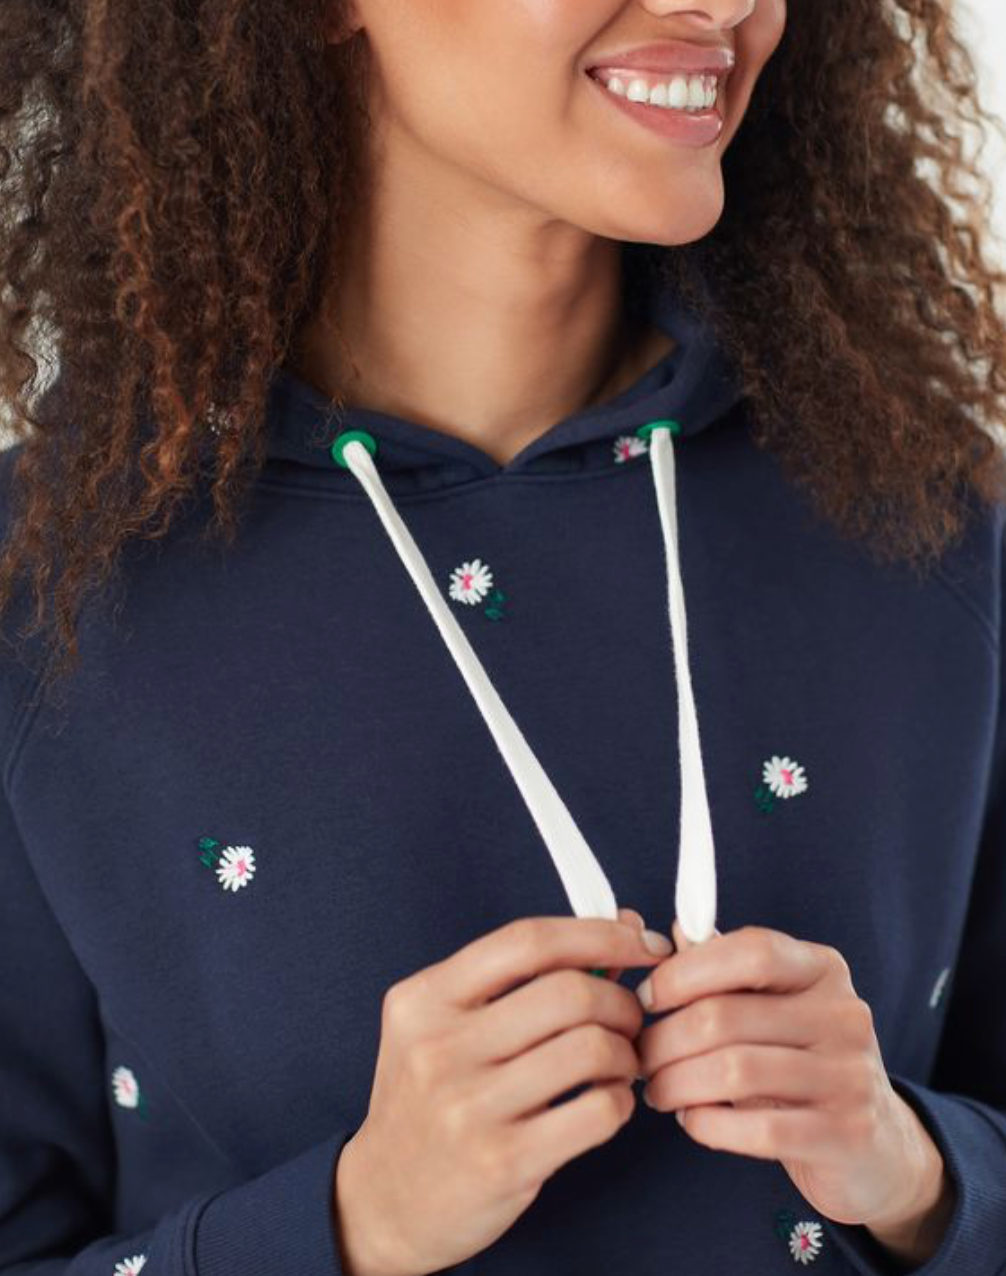 Rowley Hooded Sweatshirt in Embroidered Navy Ditsy